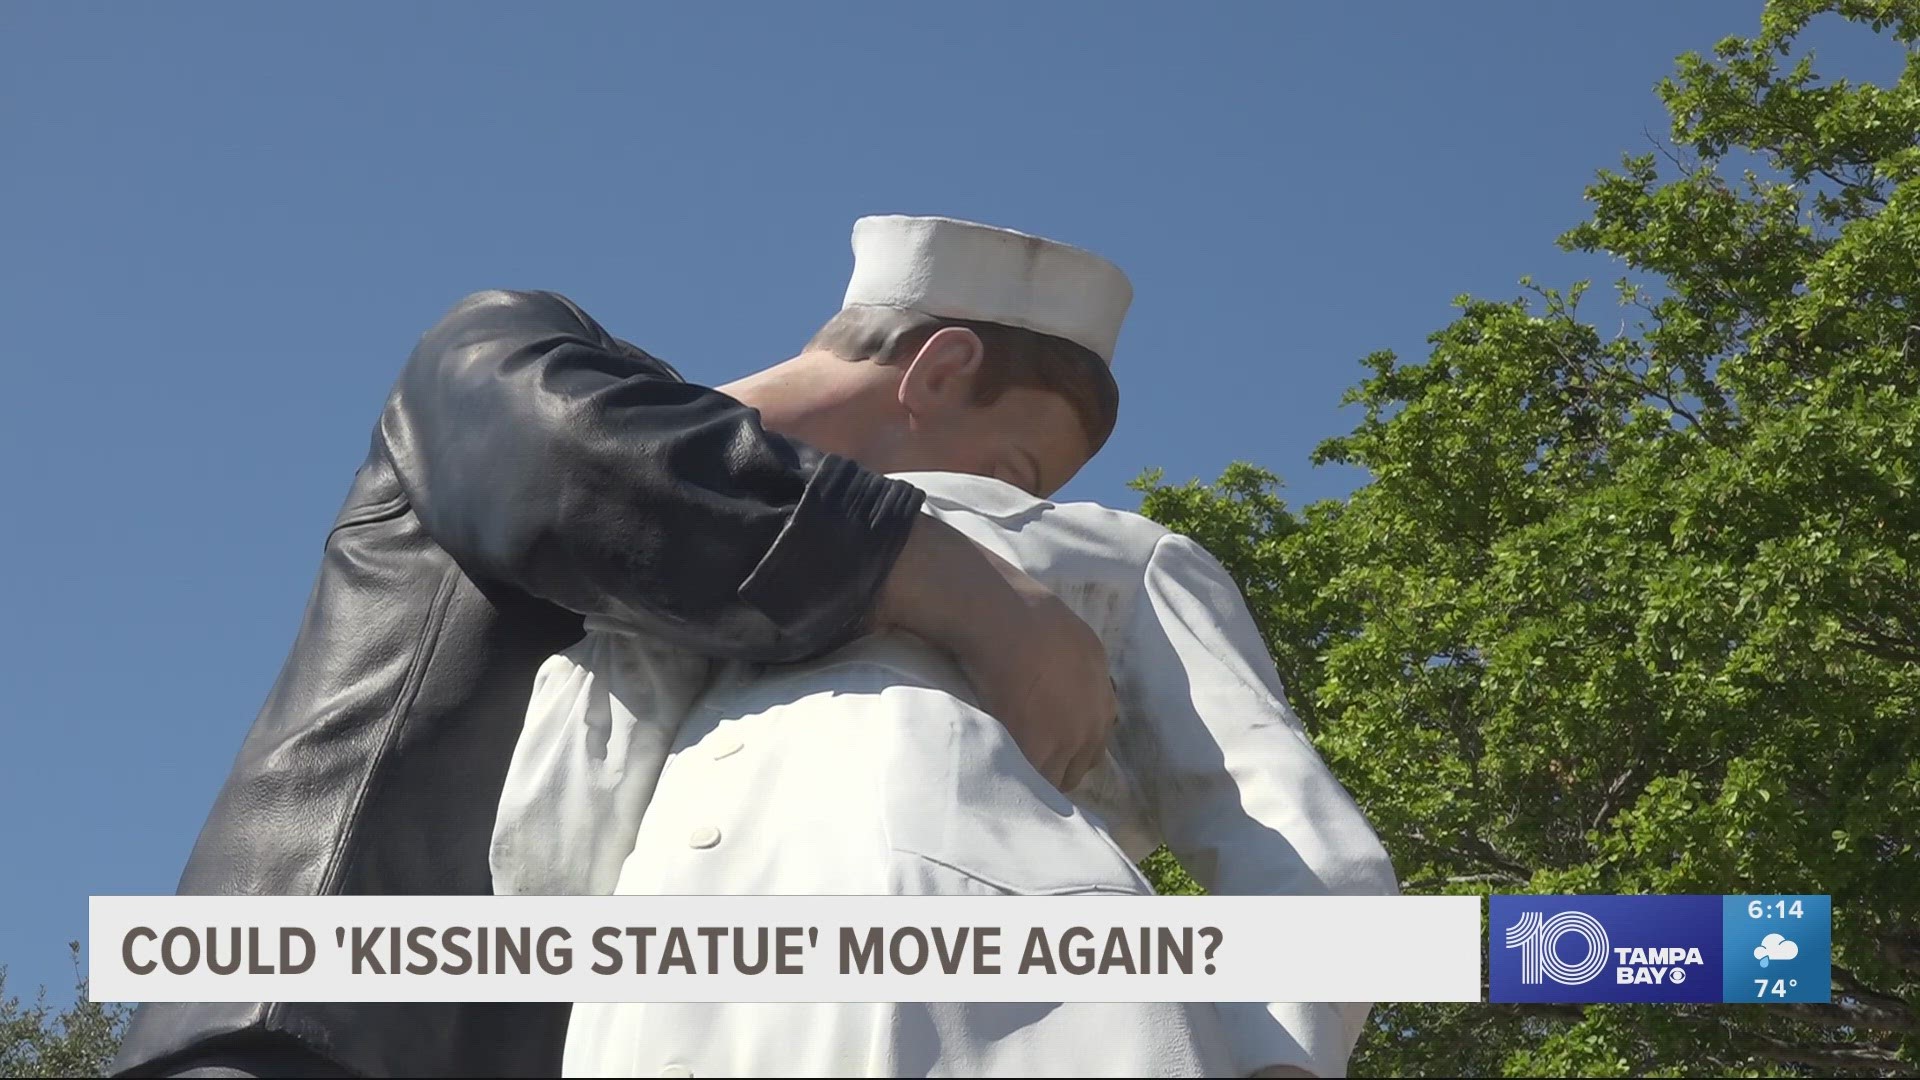 The statue shows a sailor planting a kiss on a nurse to mark the end of World War II.